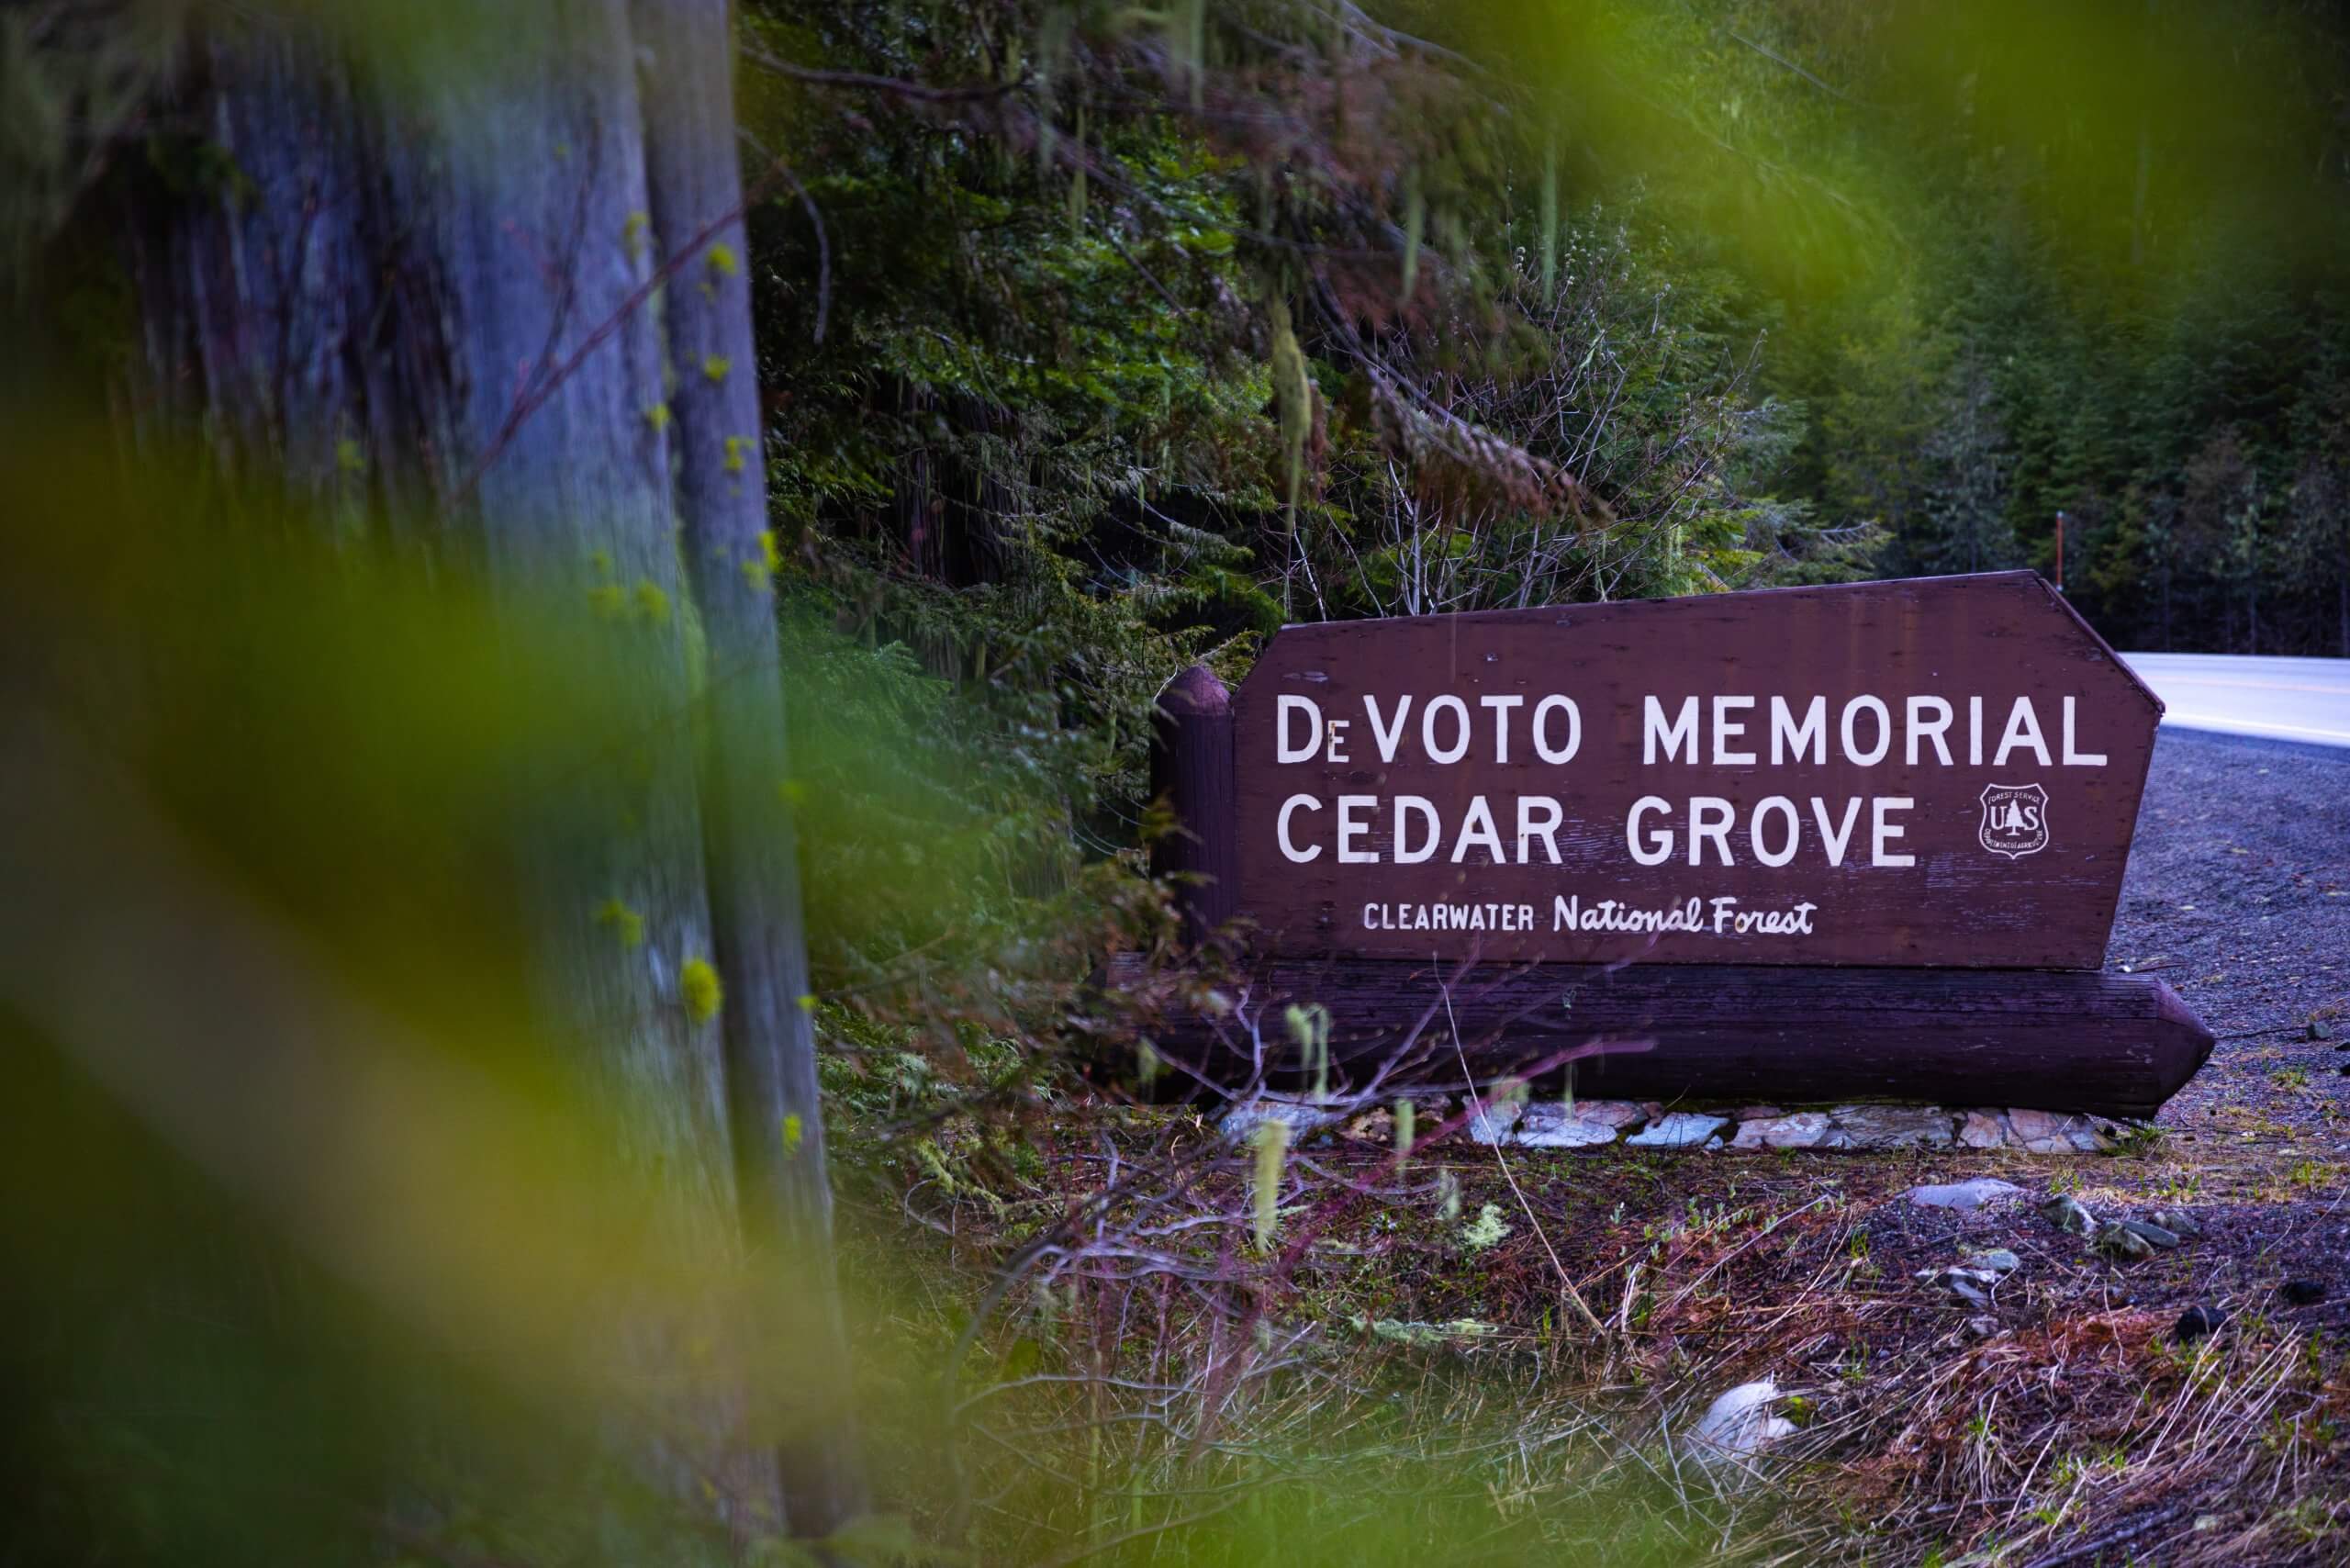 Roadside sign for Devoto Memorial Cedar Grove in the Clearwater National Forest.